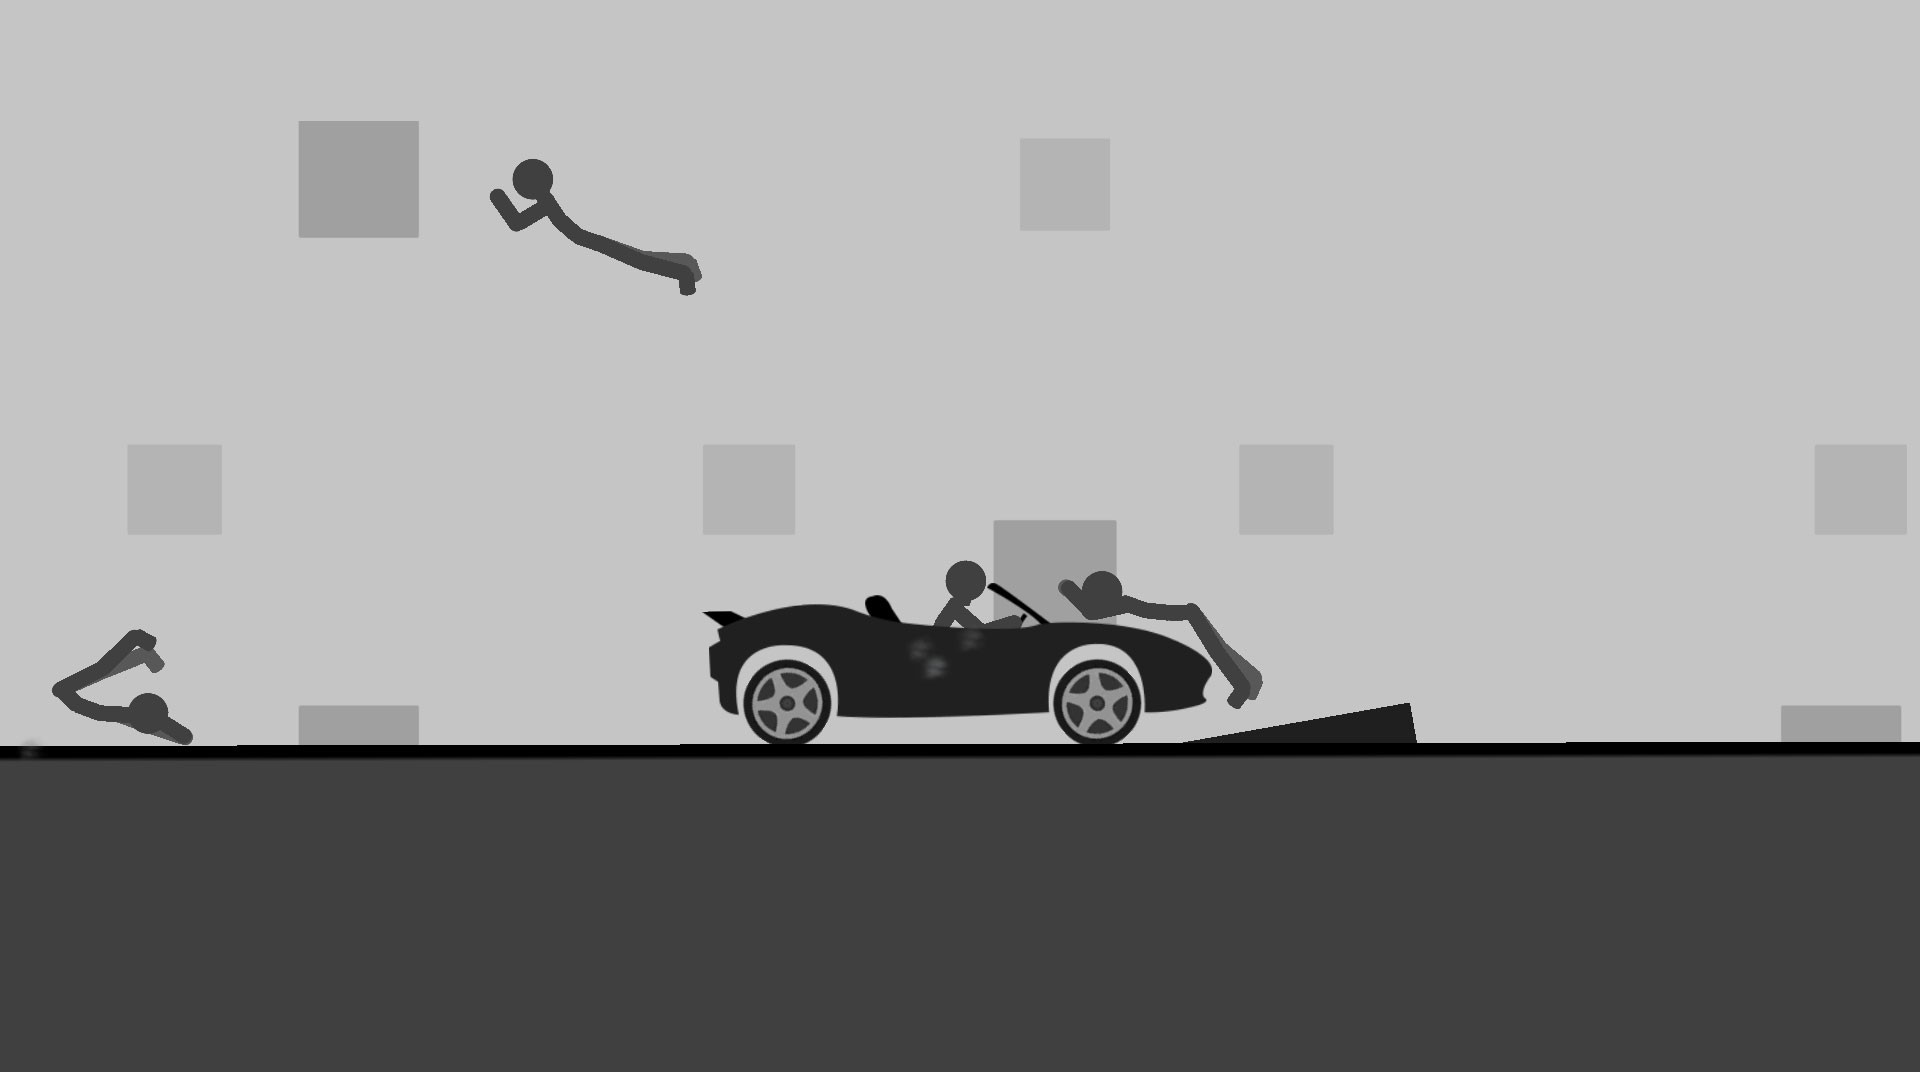 Stickman Dismounting 3.0 Apk + Mod Unlimited Money for android